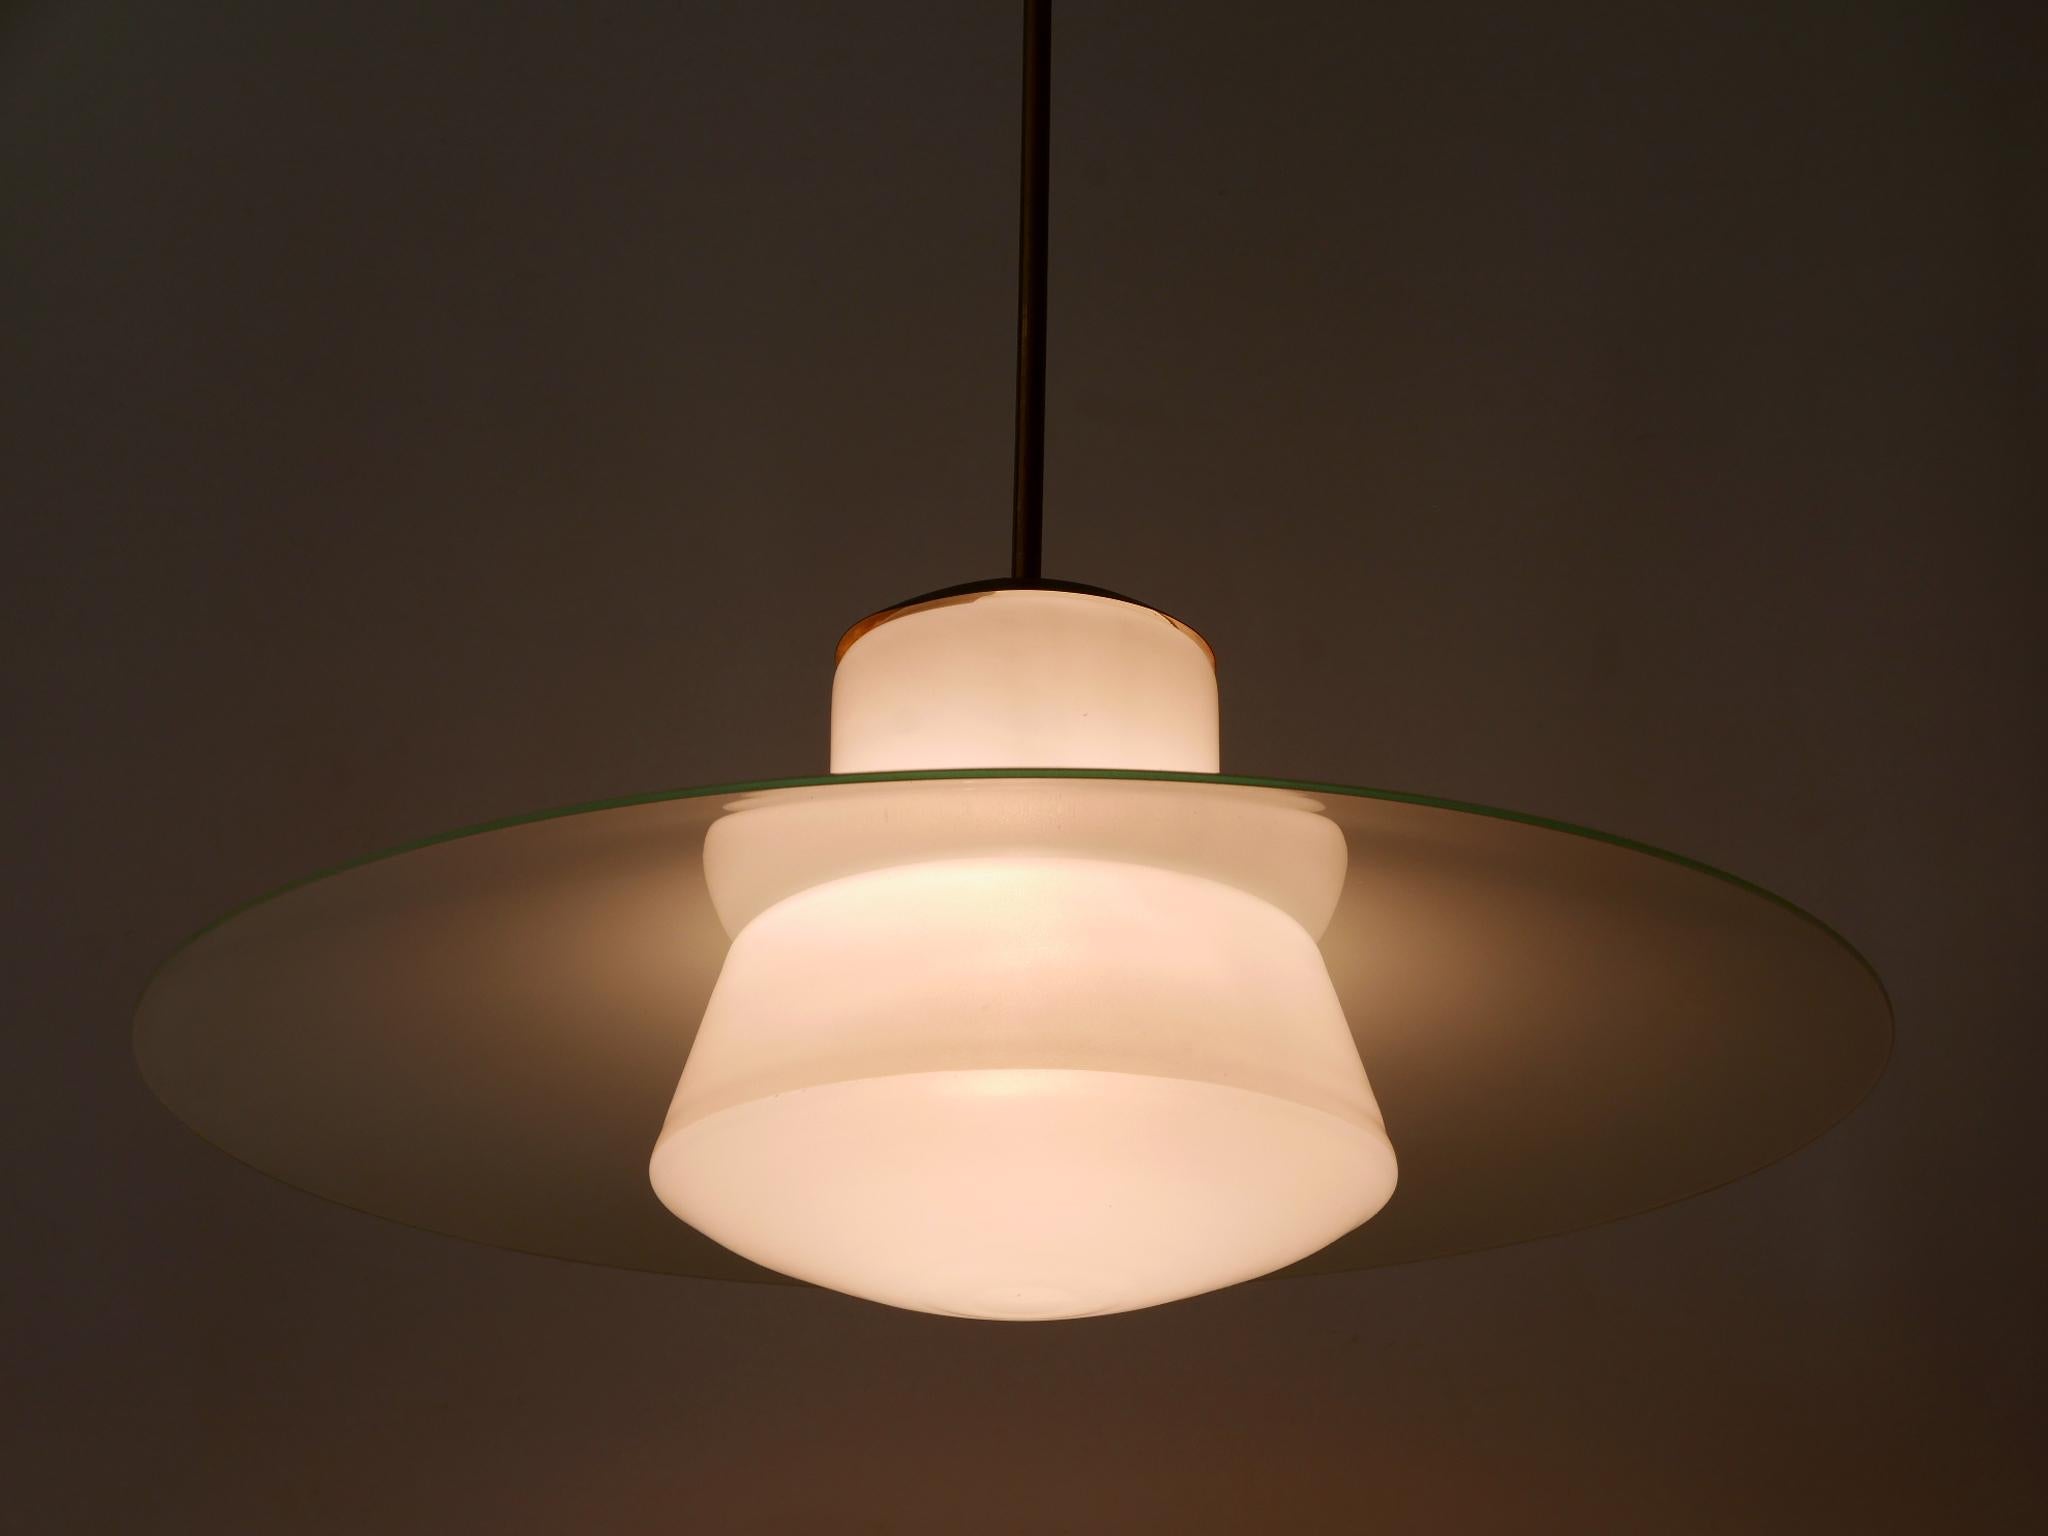 Rare Mid-Century Modern Pendant Lamp by Wolfgang Tümpel for Doria Germany 1950s For Sale 4